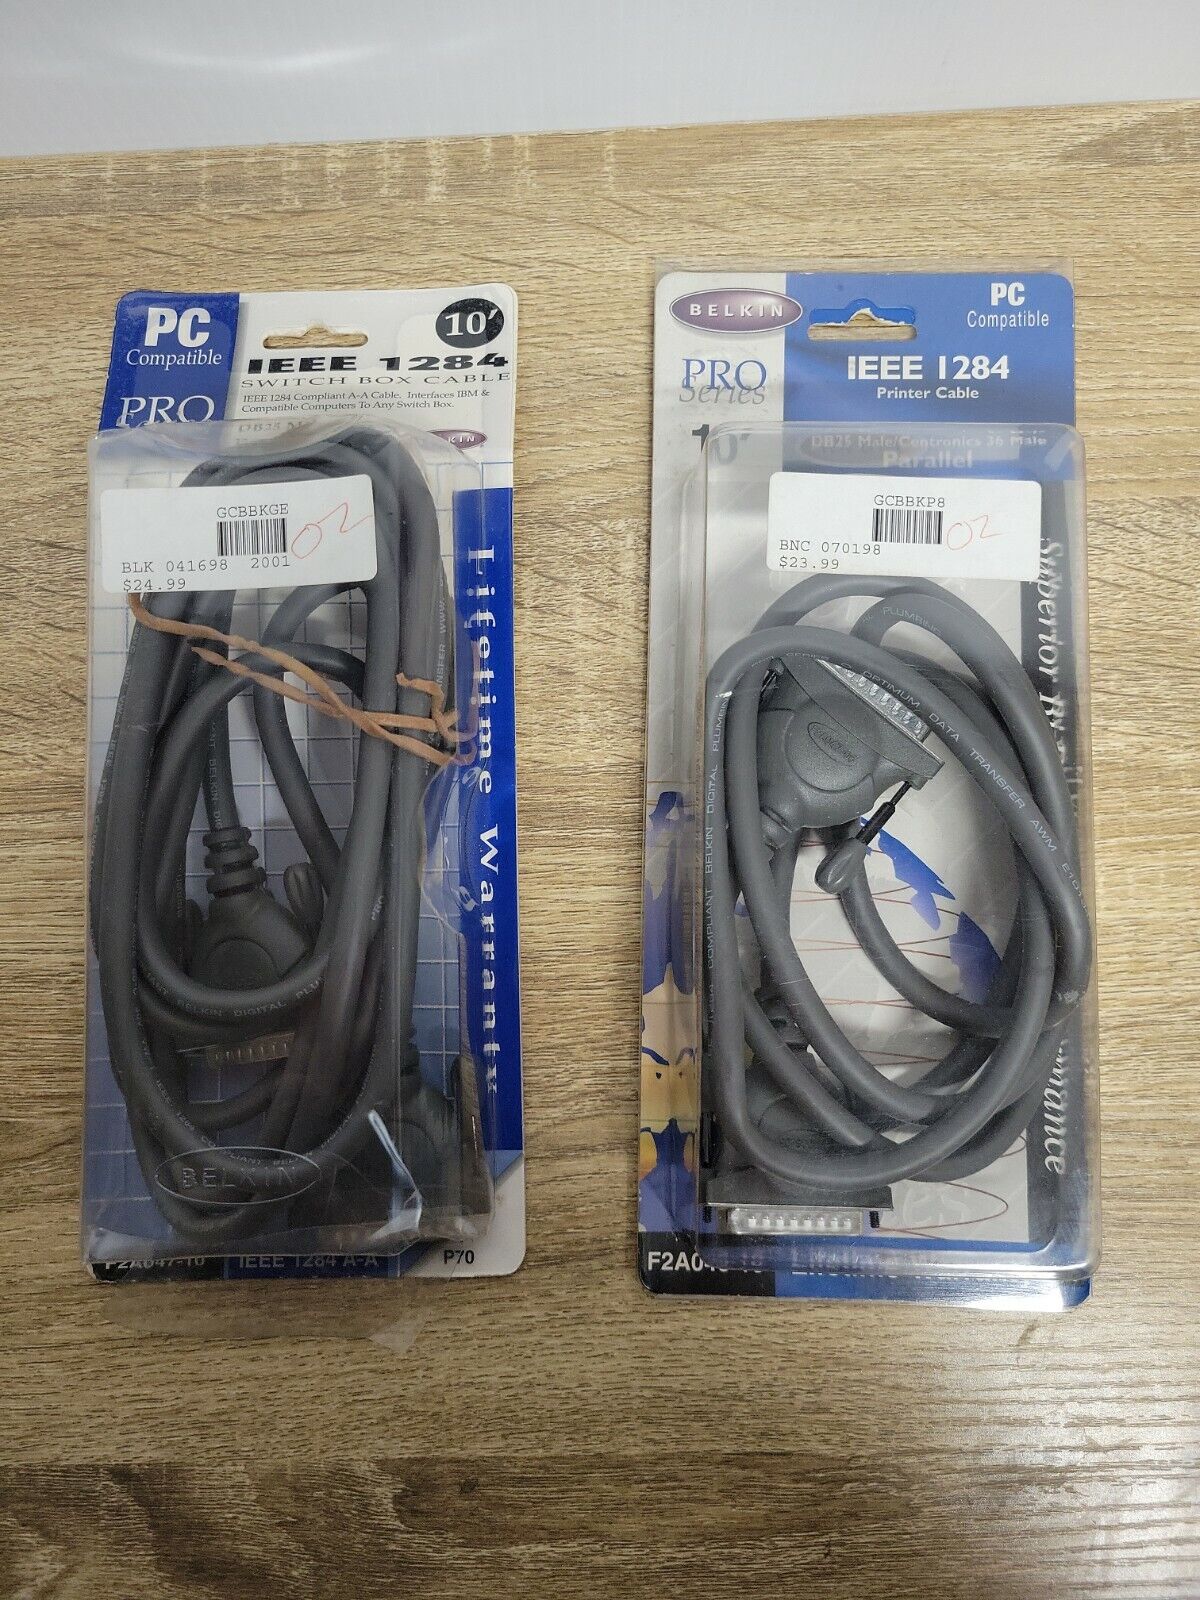 Belkin Pro Series 6 Ft Printer Cable  IEEE 1284 DB25 Male Parallel F2A046-06